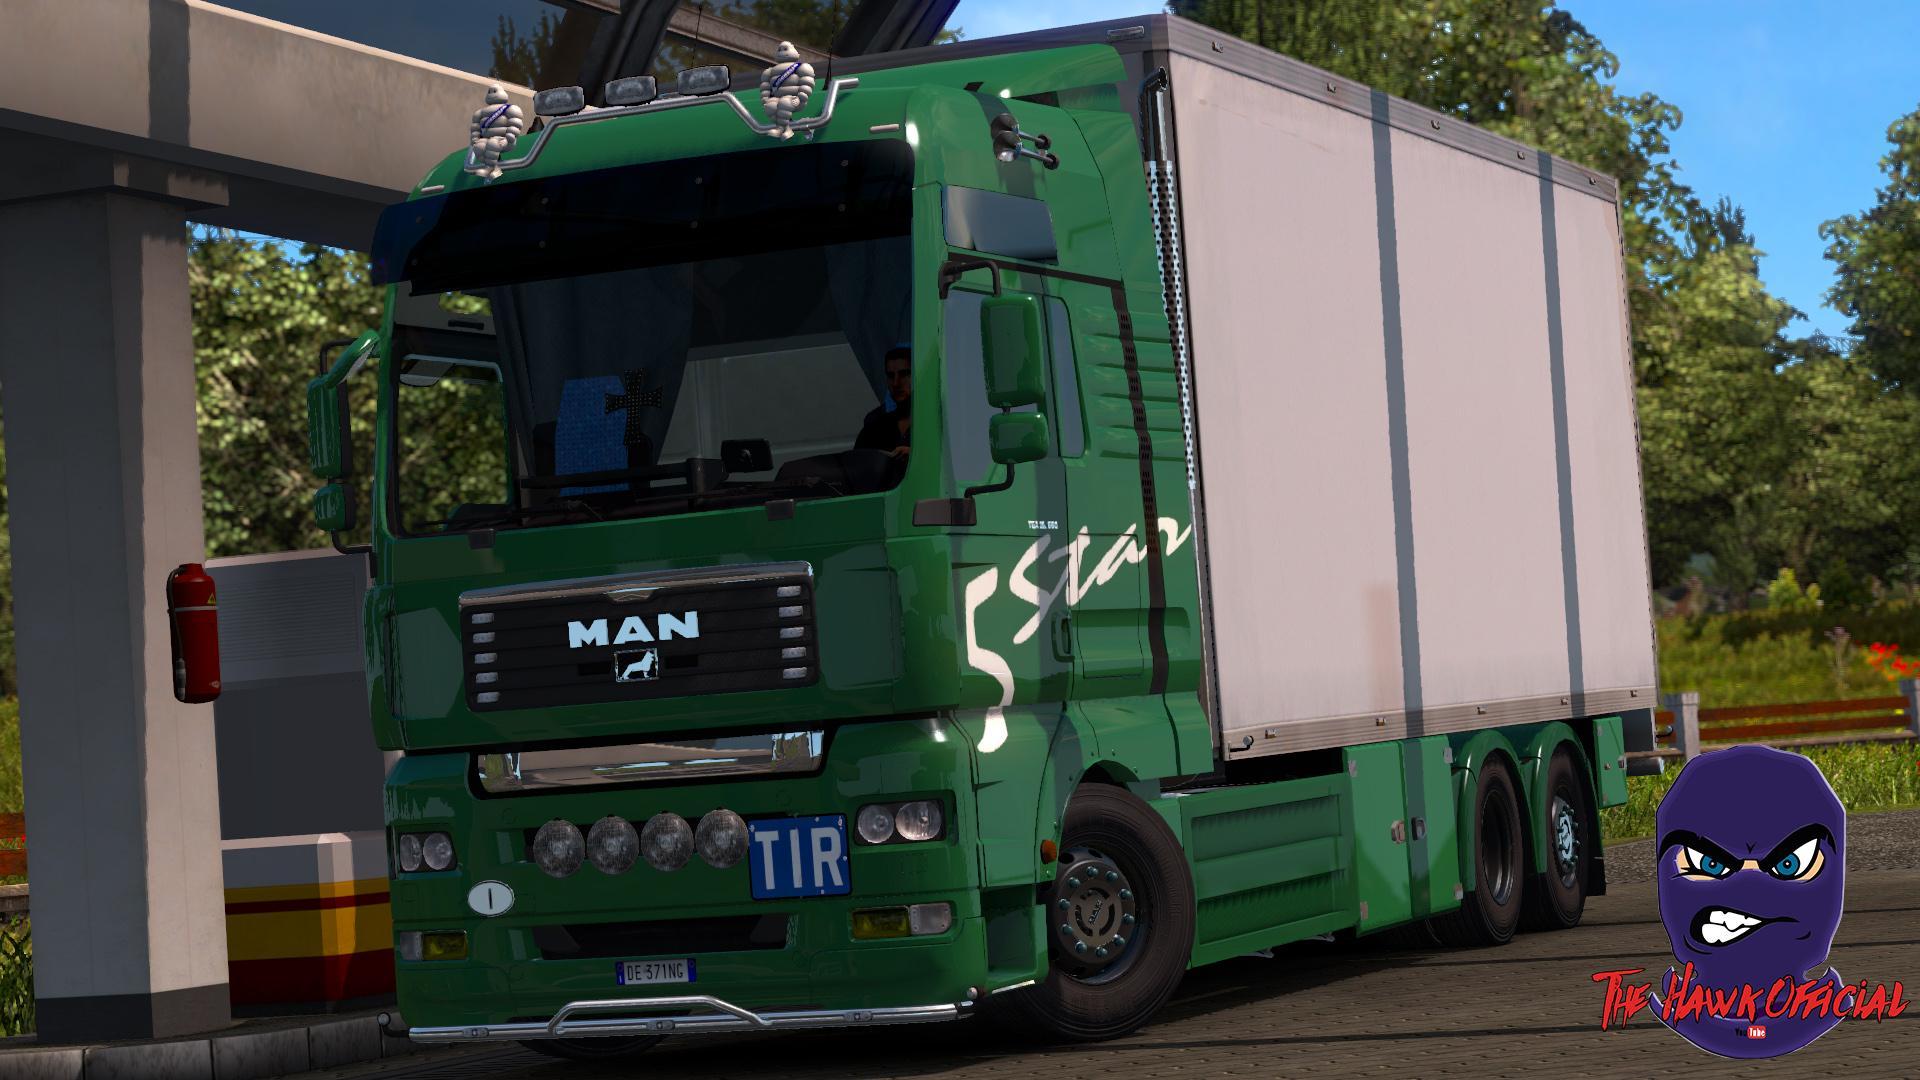 Accessories tuning by MTP »  - FS19, FS17, ETS 2 mods